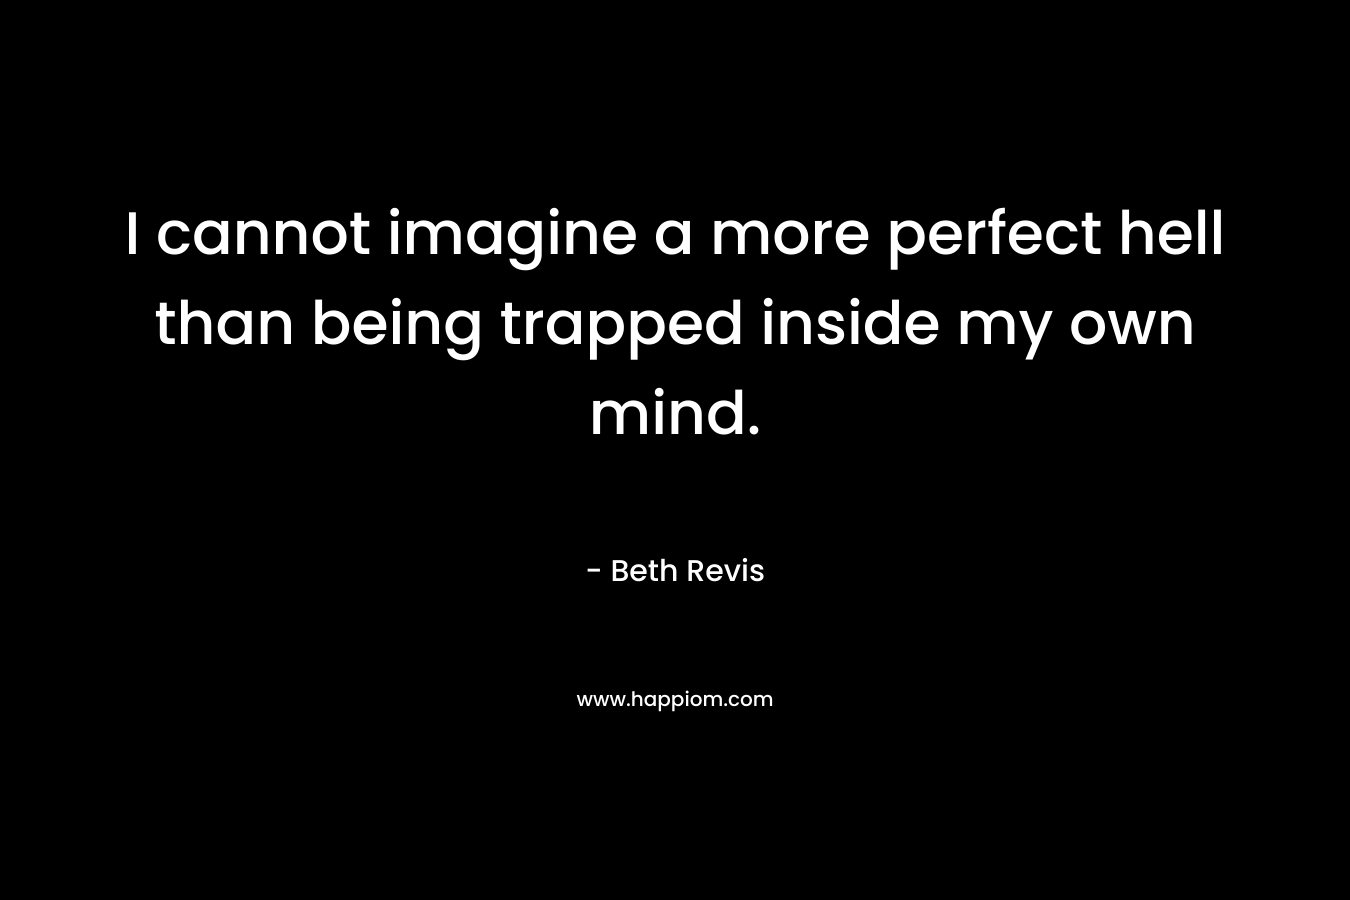 I cannot imagine a more perfect hell than being trapped inside my own mind. – Beth Revis